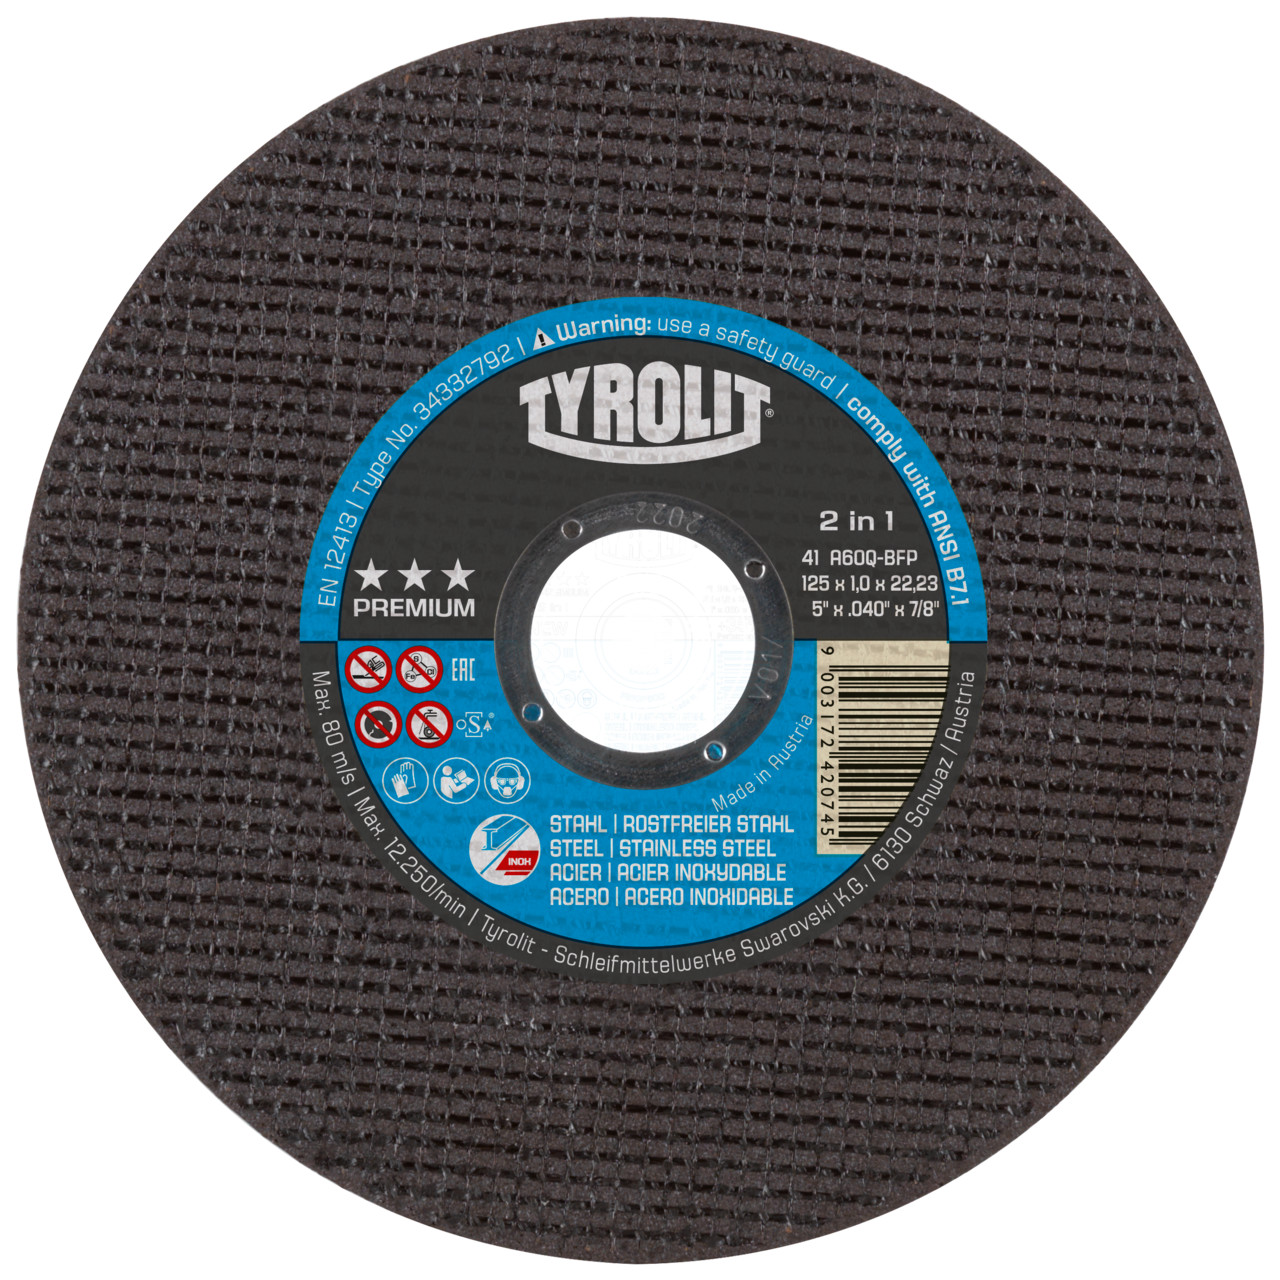 TYROLIT cut-off wheels DxDxH 230x2.5x22.23 2in1 for steel and stainless steel, shape: 41 - straight version, Art. 872343